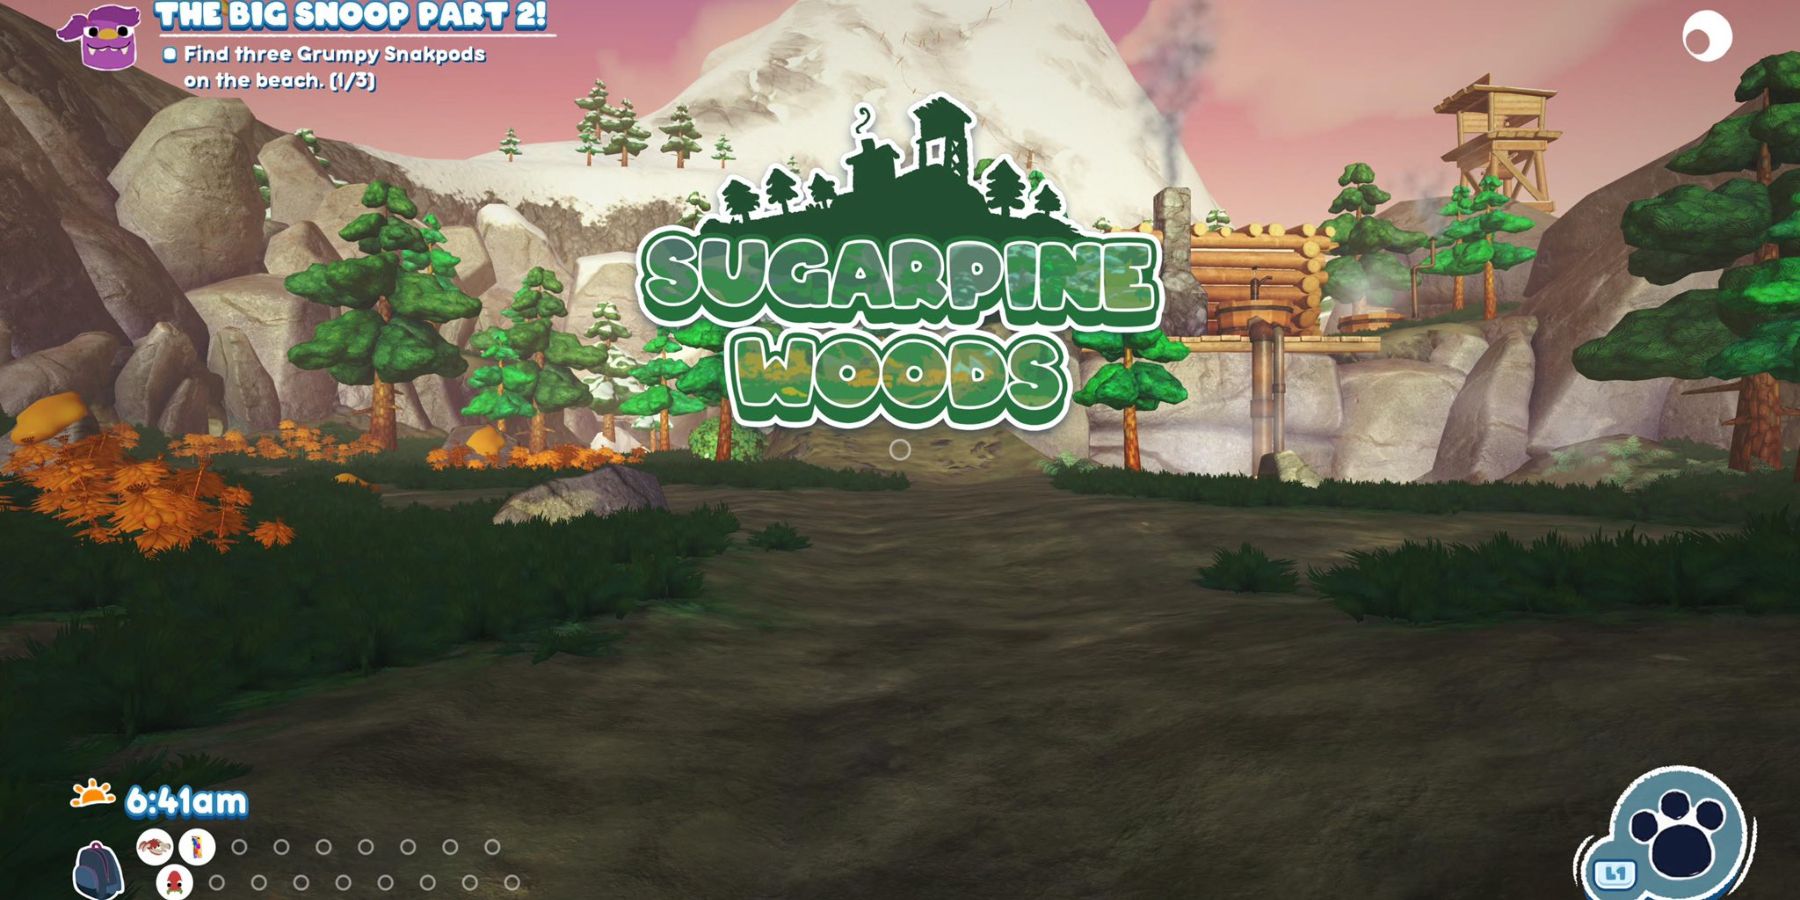 a woodsy region with a log cabin, pine trees, and a large, snow-capped mountain in the distance. the words Sugarpine Woods hover in the middle of the screen